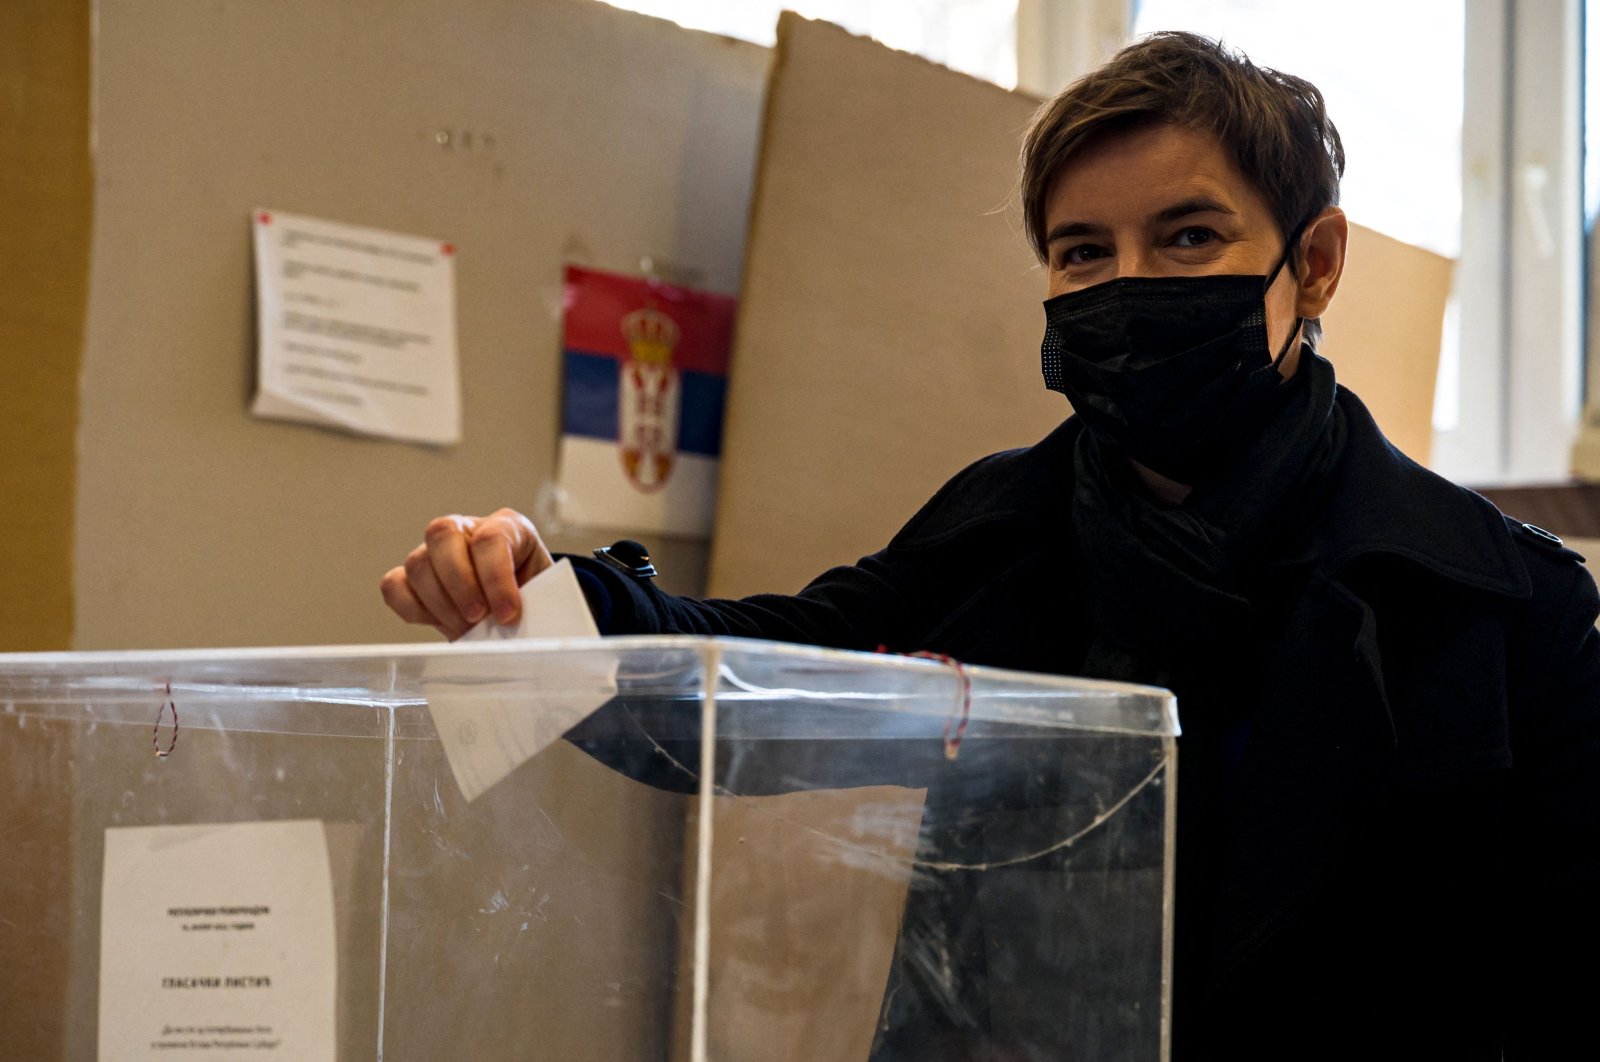 Serbian Prime Minster Ana Brnabic casts her ballot at a polling station in an art school in Belgrade on Jan. 16, 2022 (AFP Photo)